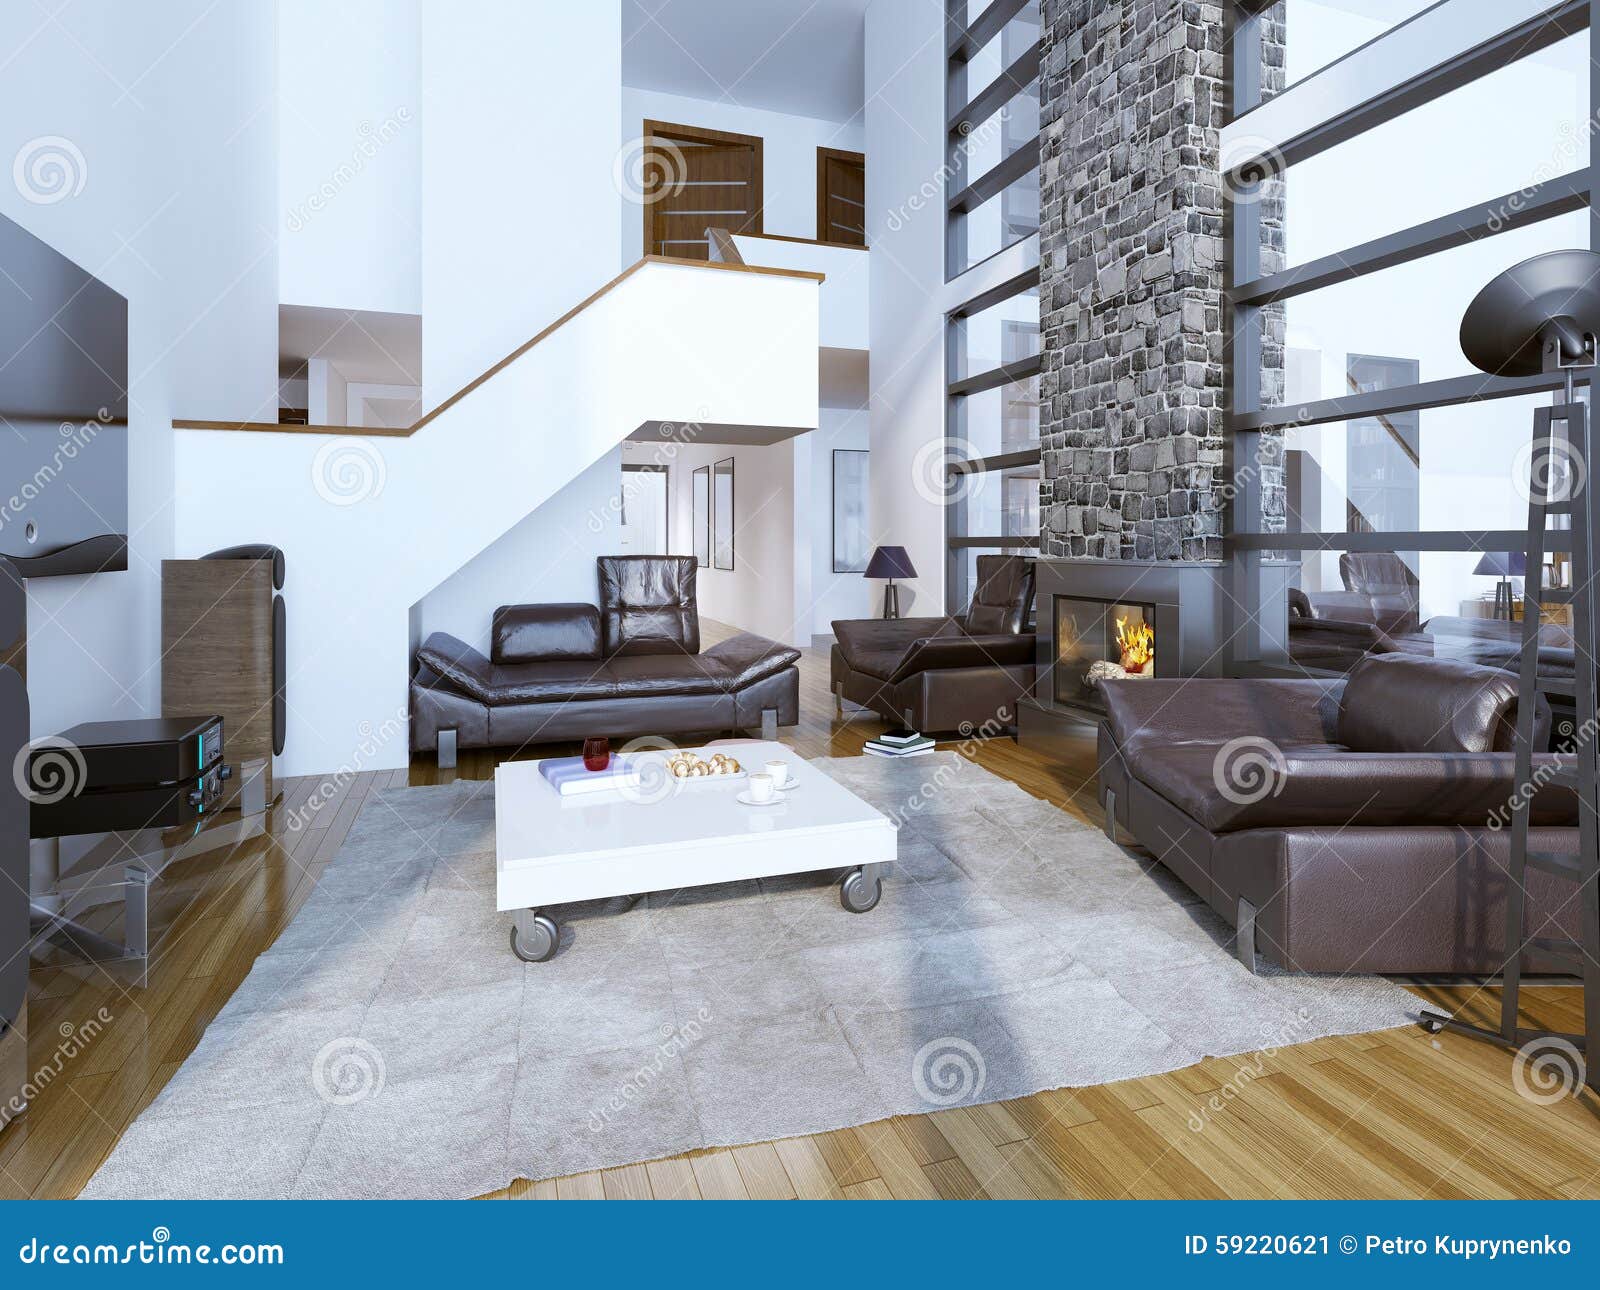 Design Of Cozy Modern Living Room Stock Image Image Of